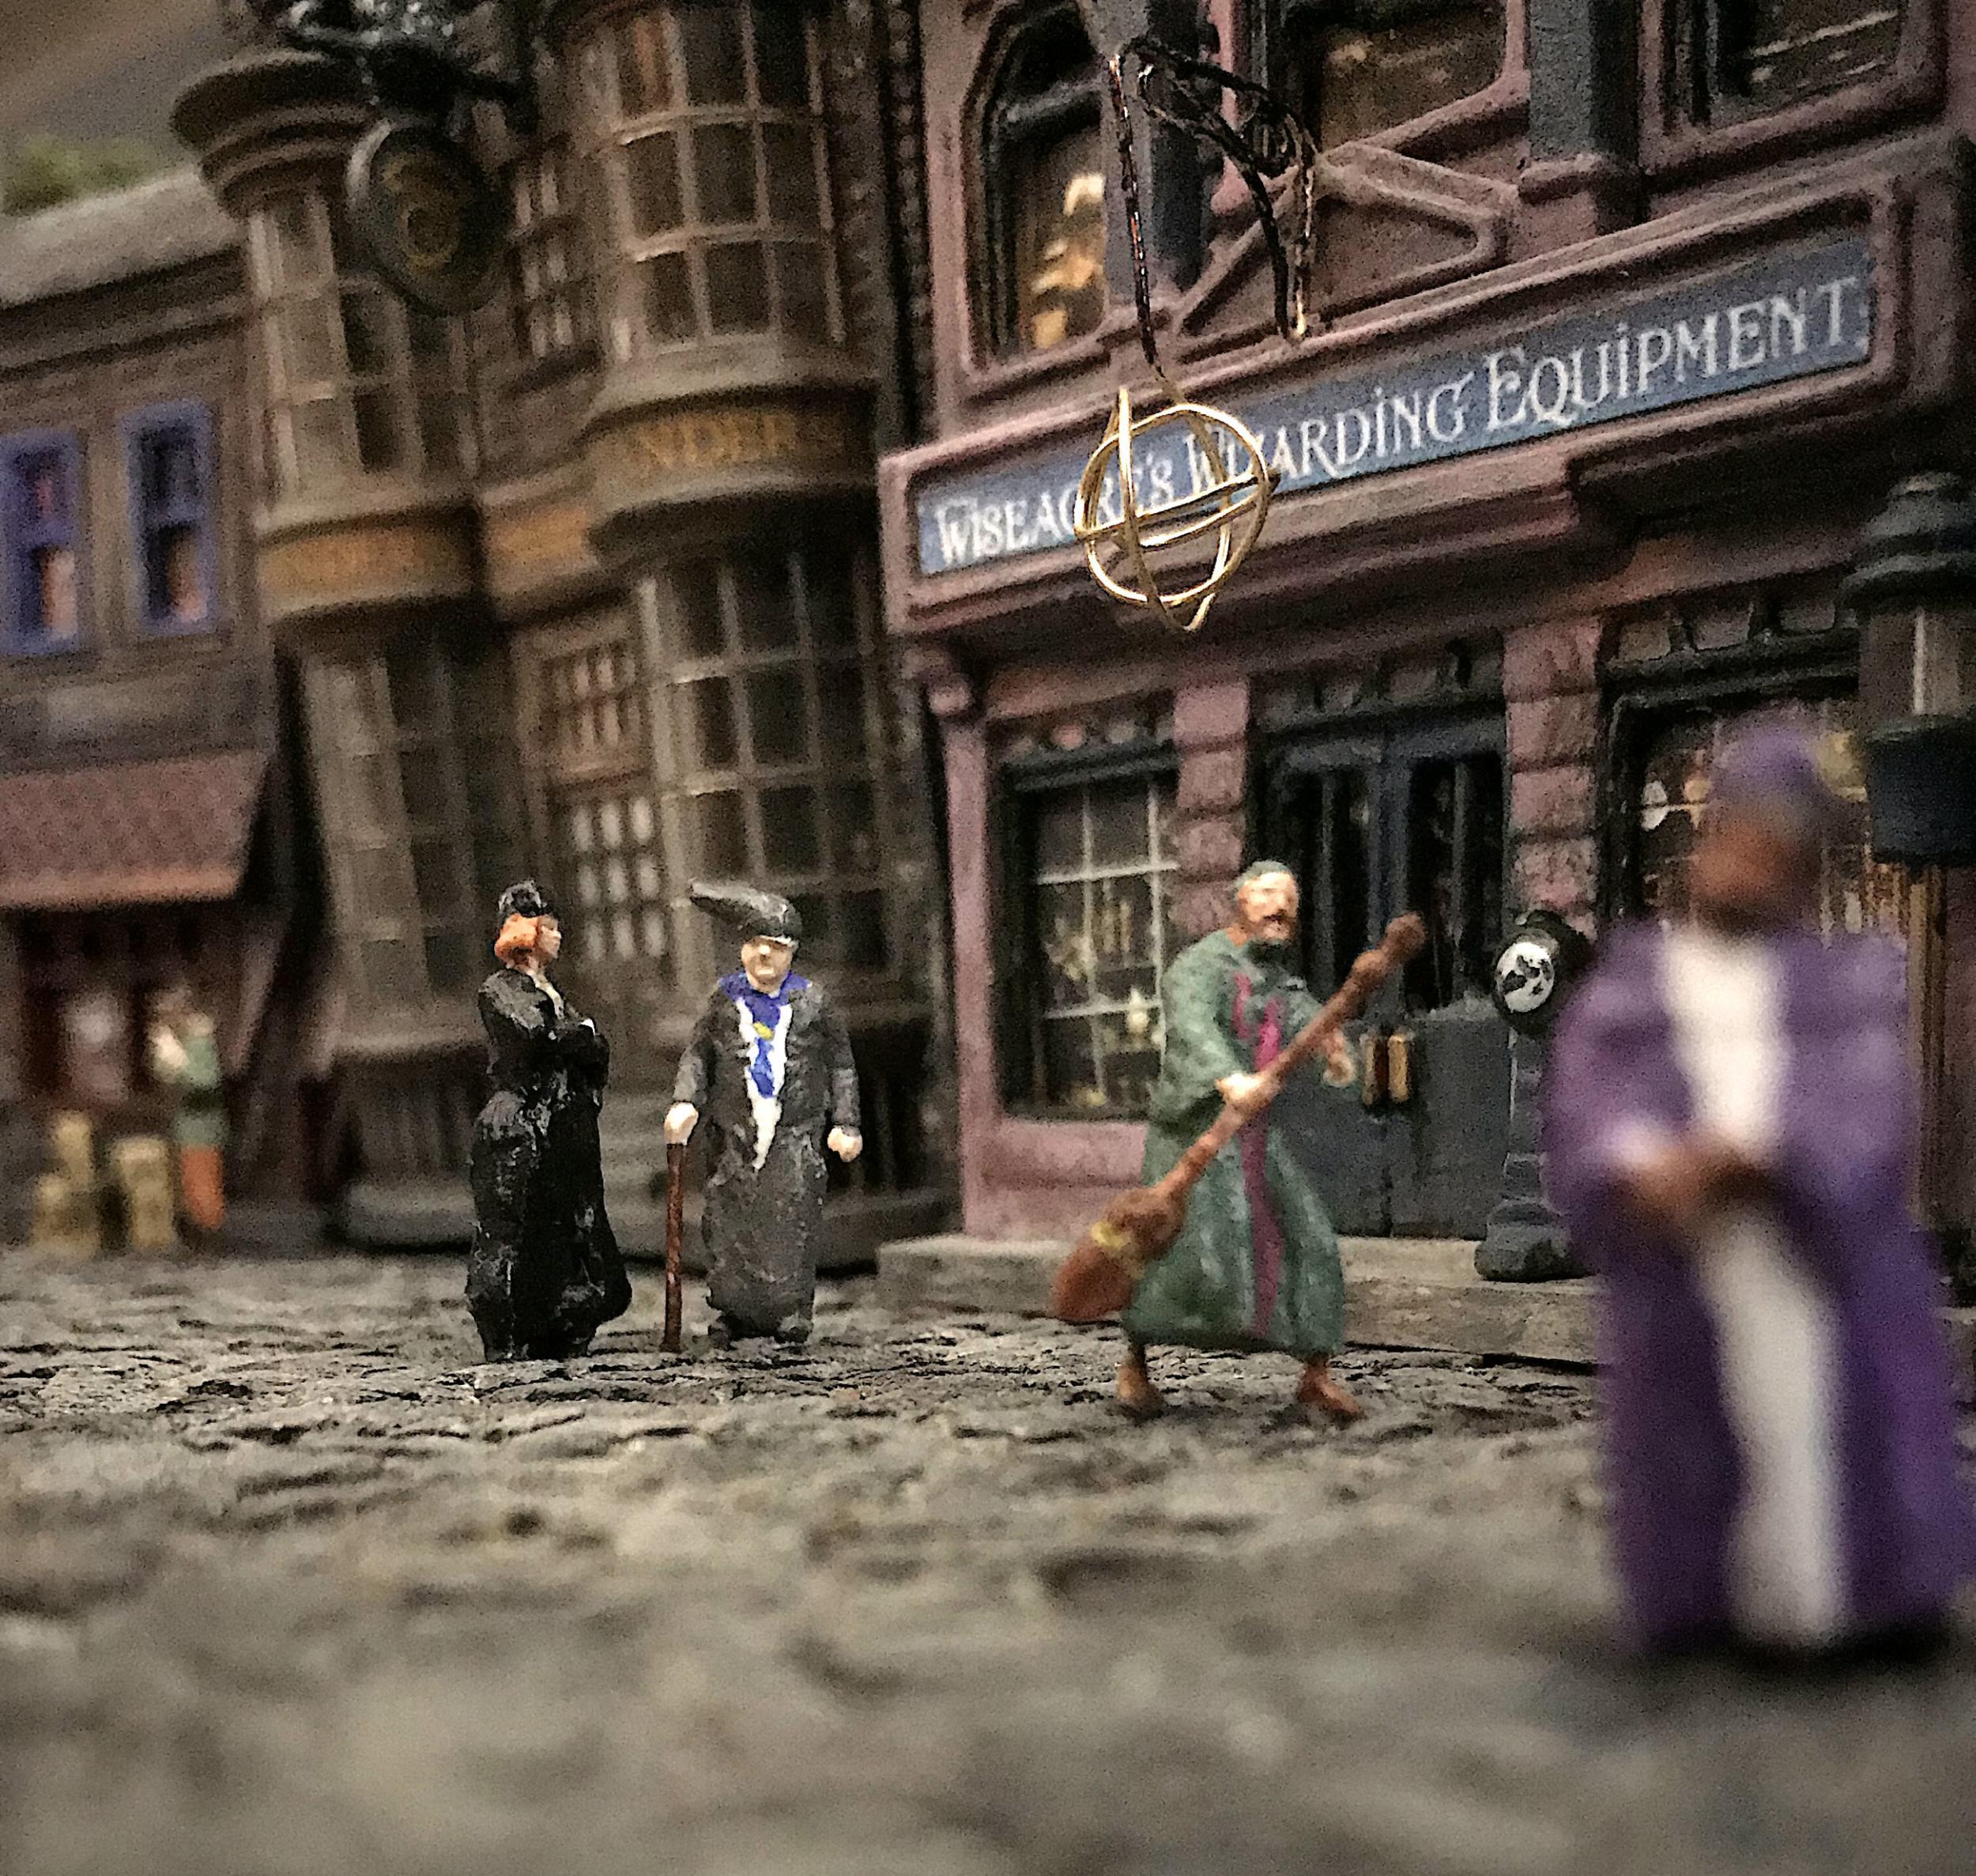 Father creates mini version of the Harry Potter world (SWNS)